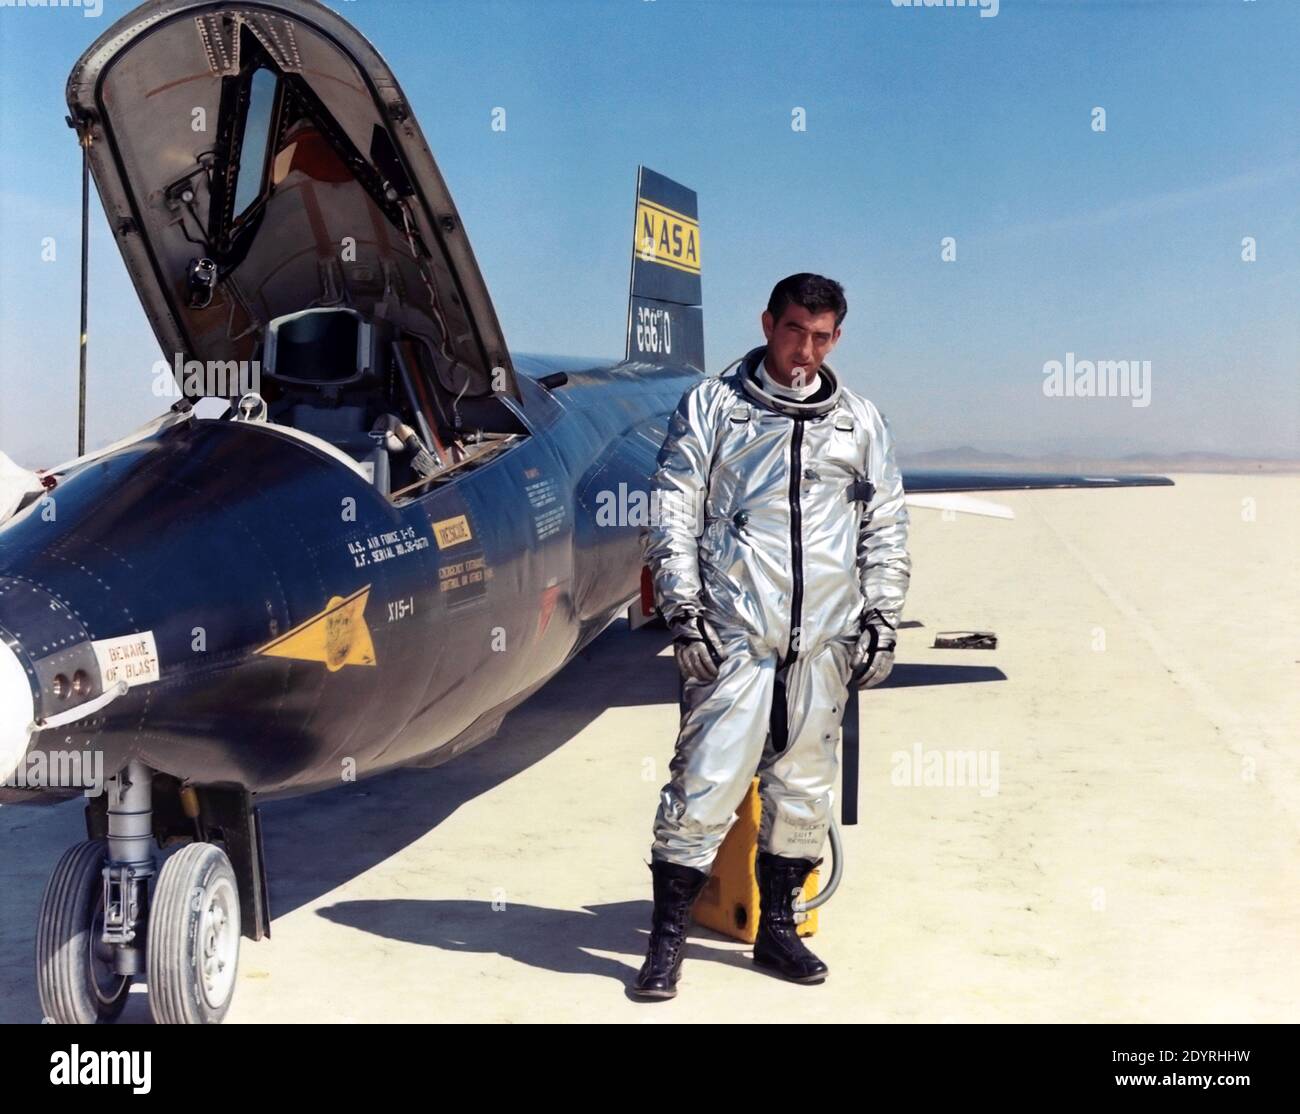 Michael J. Adams with X-15 March 22,  Air Force test pilot Maj. Michael J. Adams stands beside X-15 ship number one. Adams was selected for the X-15 program in 1966 and made his first flight on Oct. 6, 1966. On Nov. 15, 1967, Adams made his seventh and final X-15 flight. The X-15 launched from the B-52, but during the ascent an electrical problem affected the X-15's control system. The aircraft crashed northwest of Cuddeback Lake, California, causing the death of Adams. He was posthumously awarded Air Force astronaut wings because his final flight exceede Stock Photo